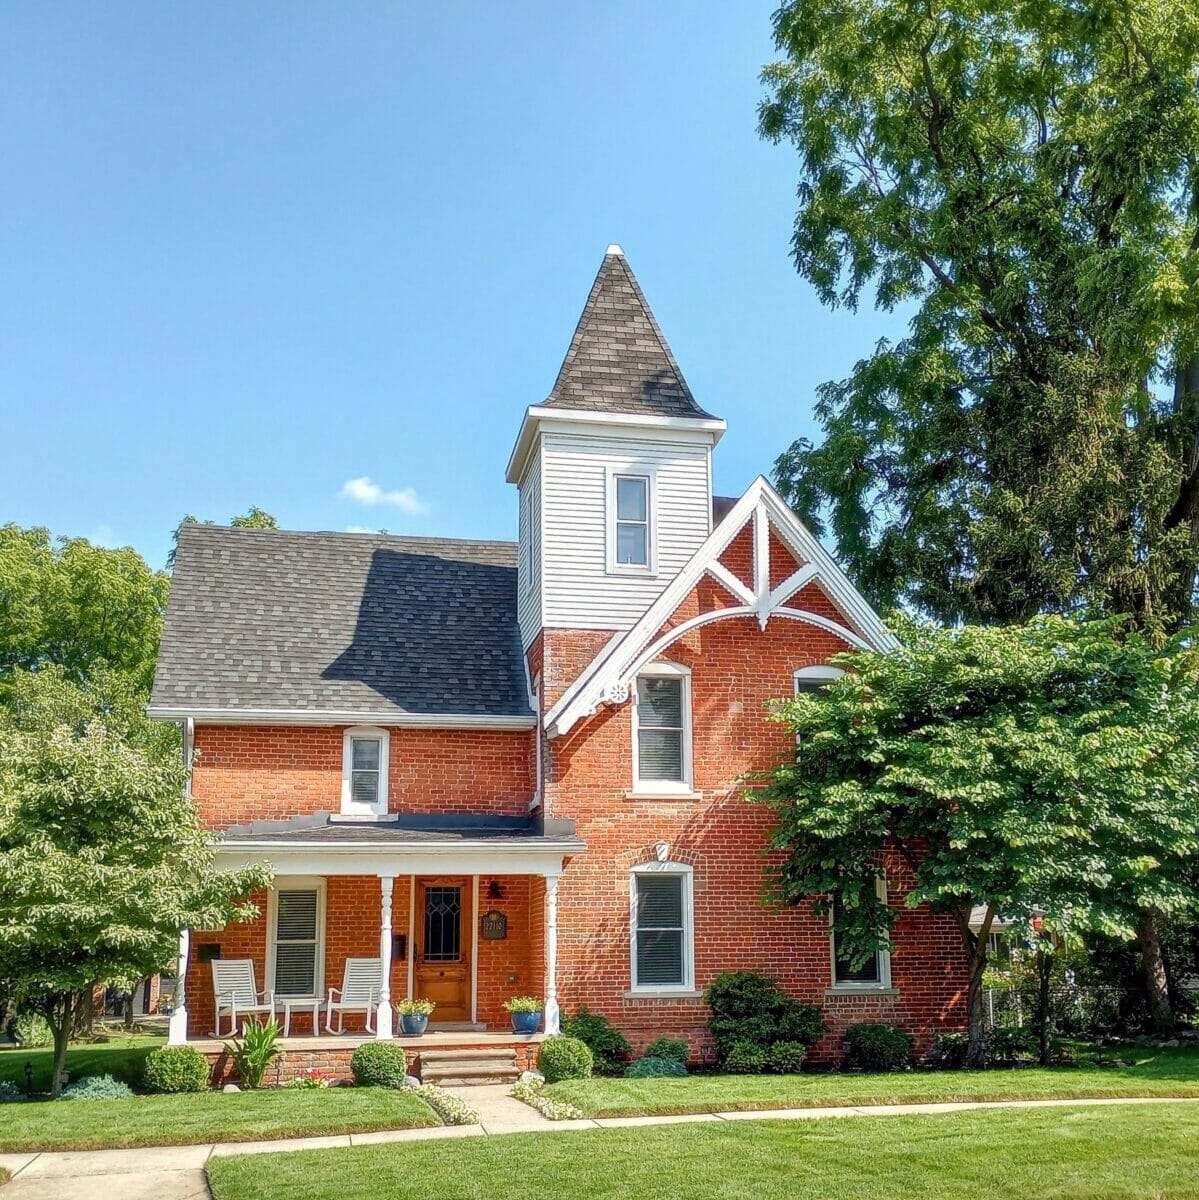 A beautiful home in Dearborn, Michigan - built in 1890 --located on Morley Avenue, near Mason Street.